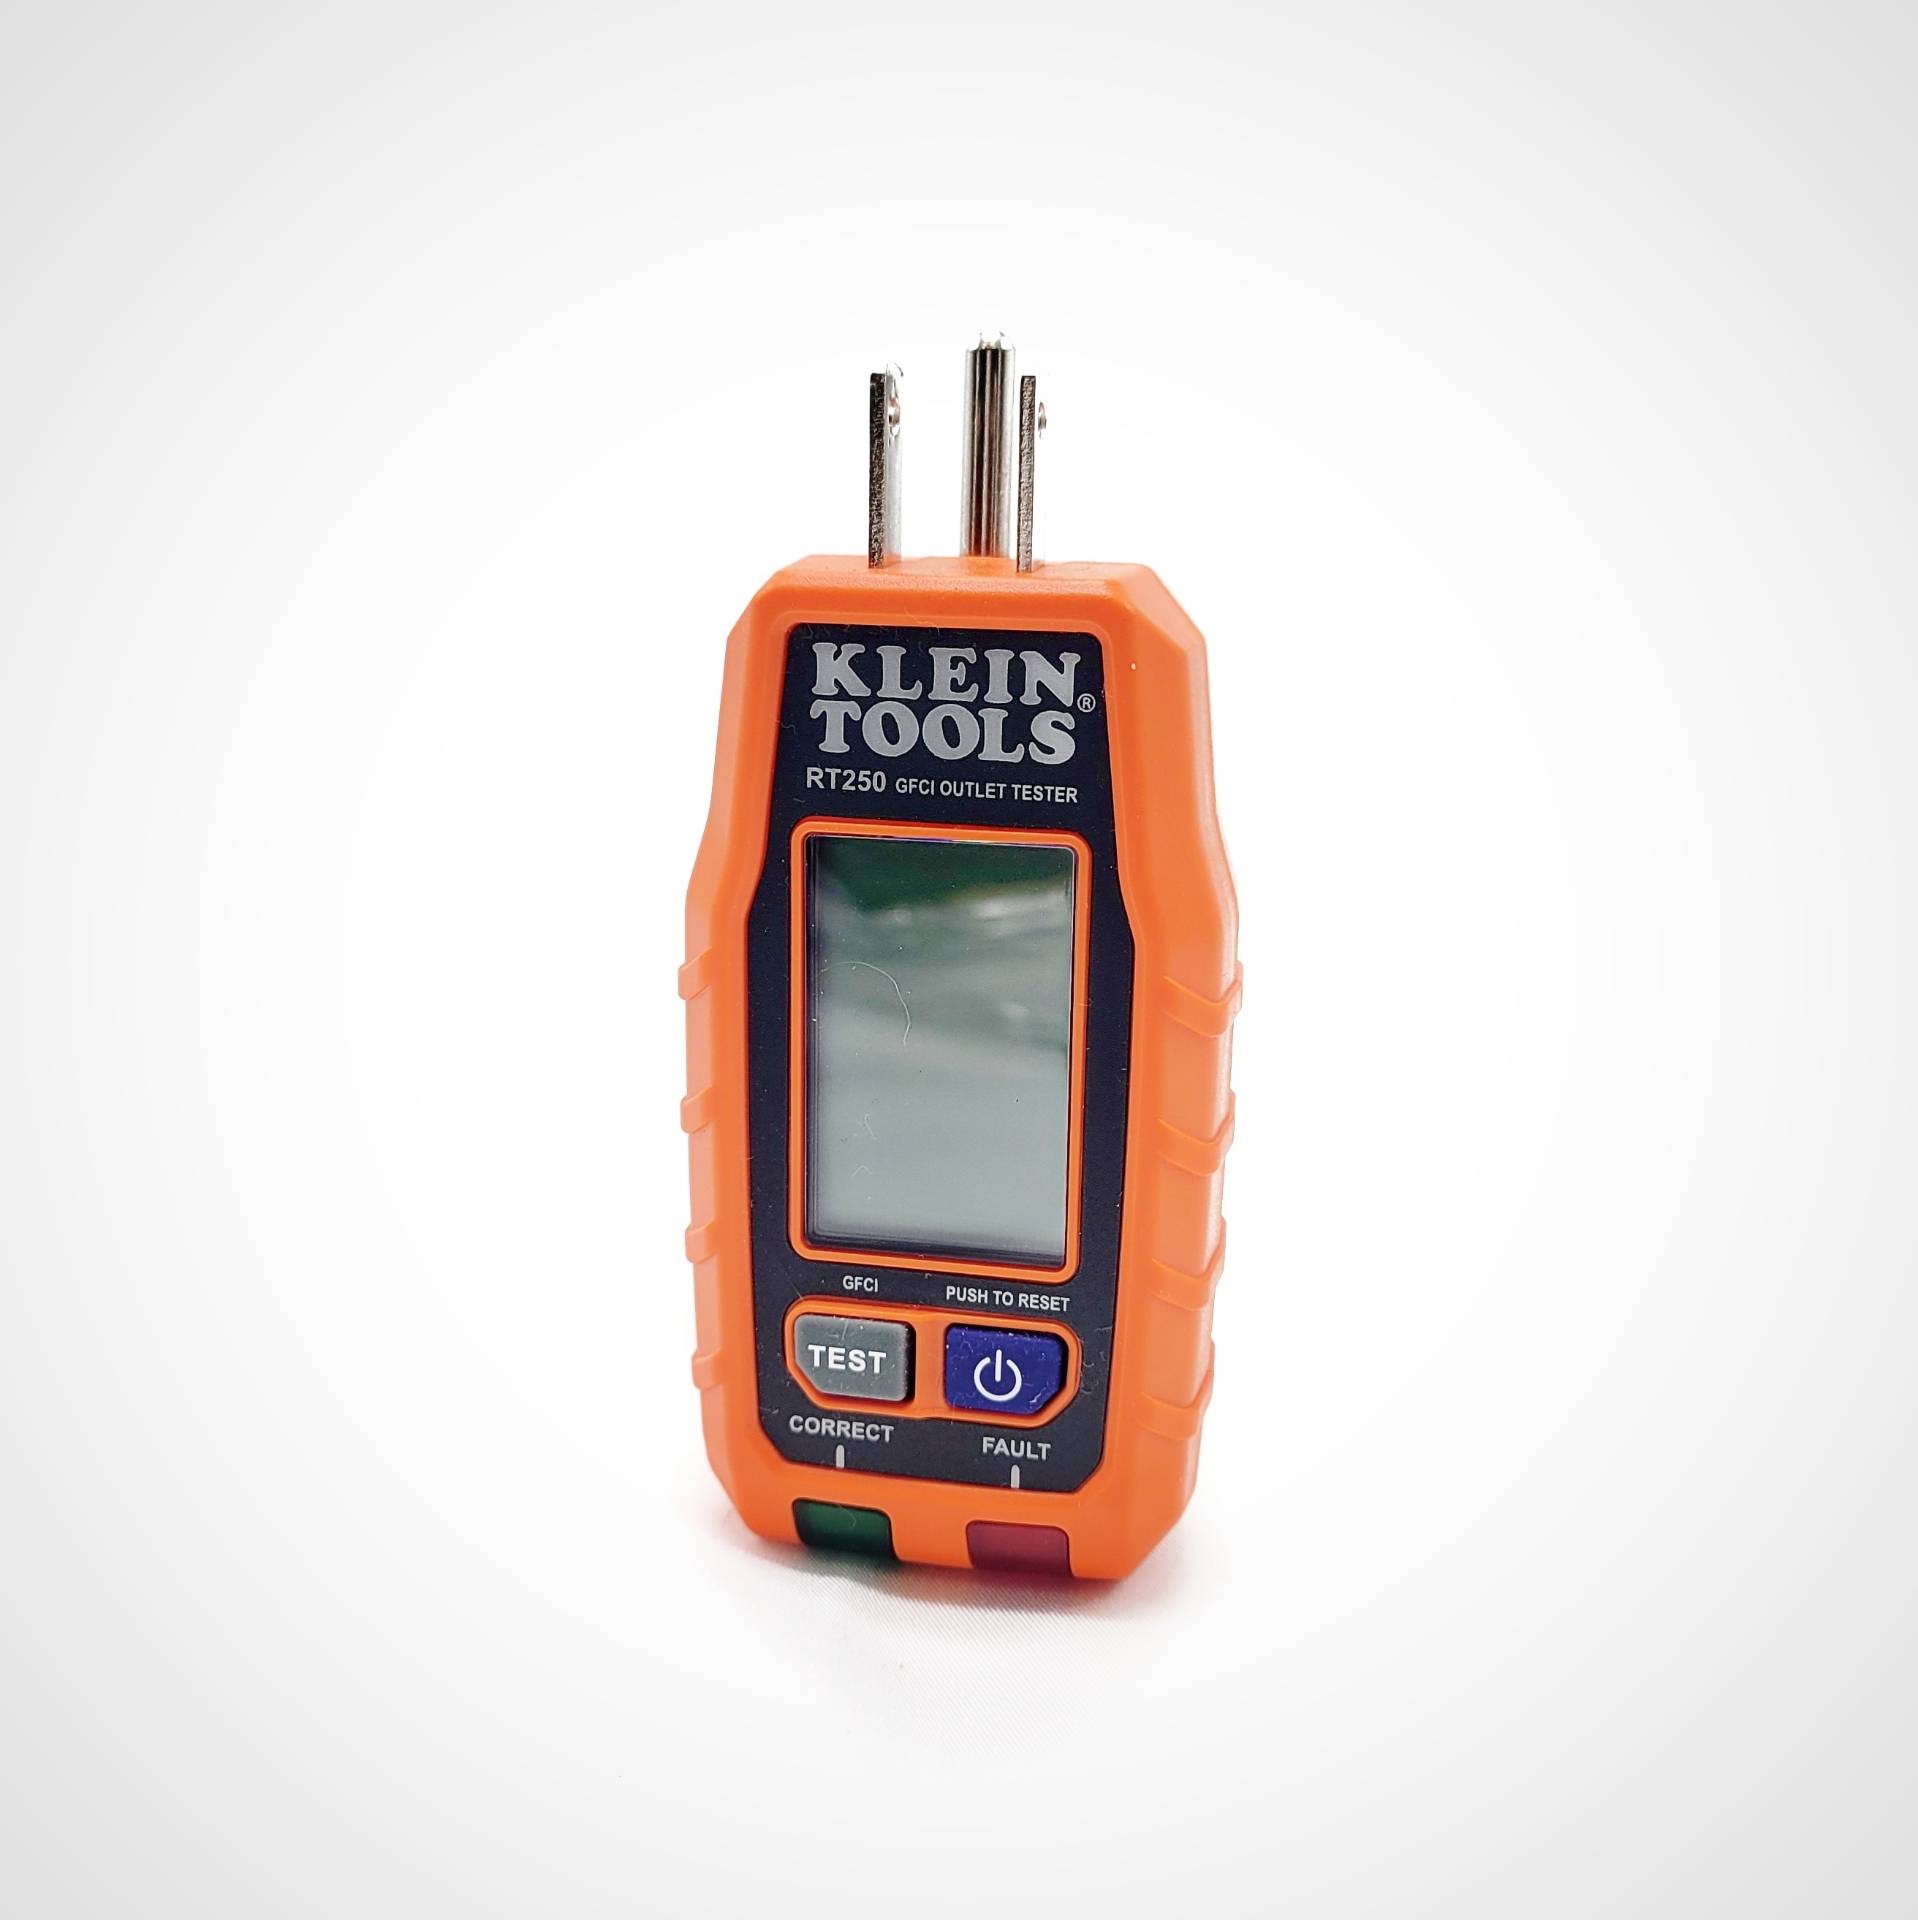 Klein Tools RT250 GFCI Outlet Tester Contents